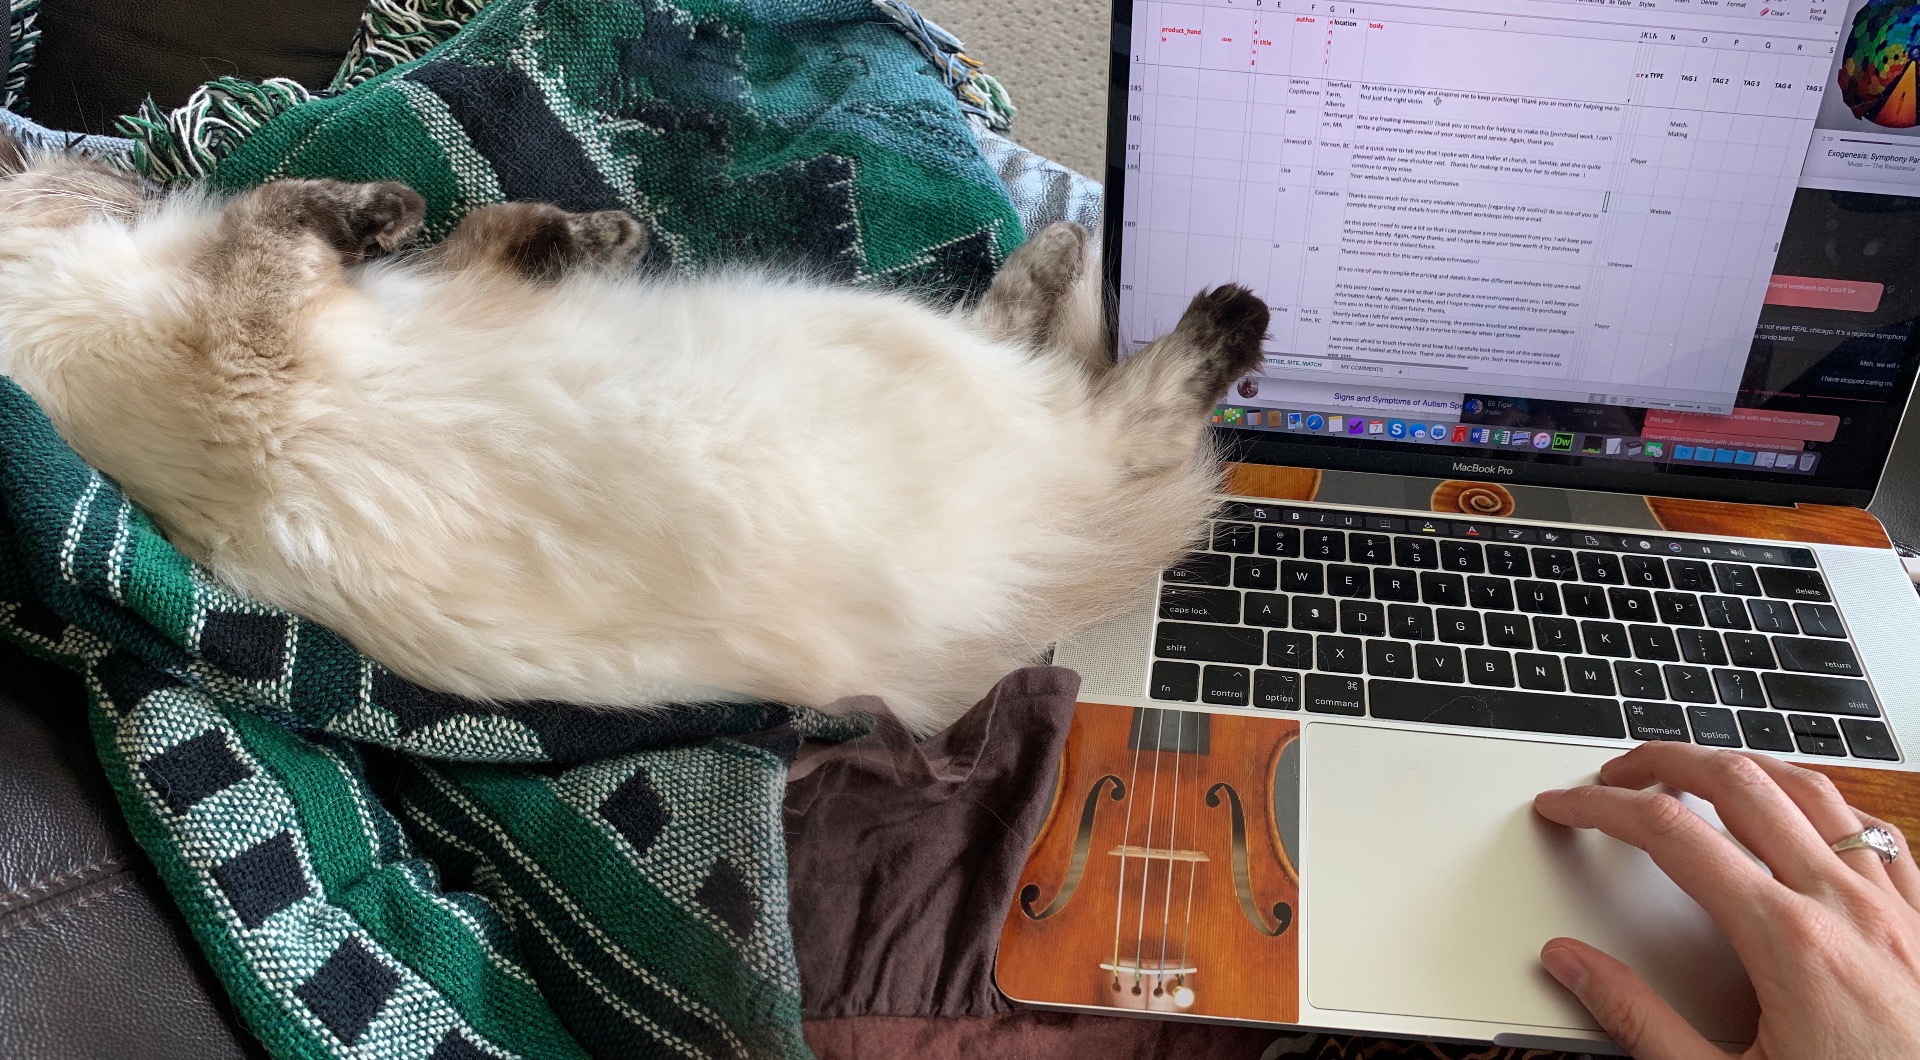 POV of laptop user's laptop and hand with cat sleeping on her back with her foot blocking some of the laptop